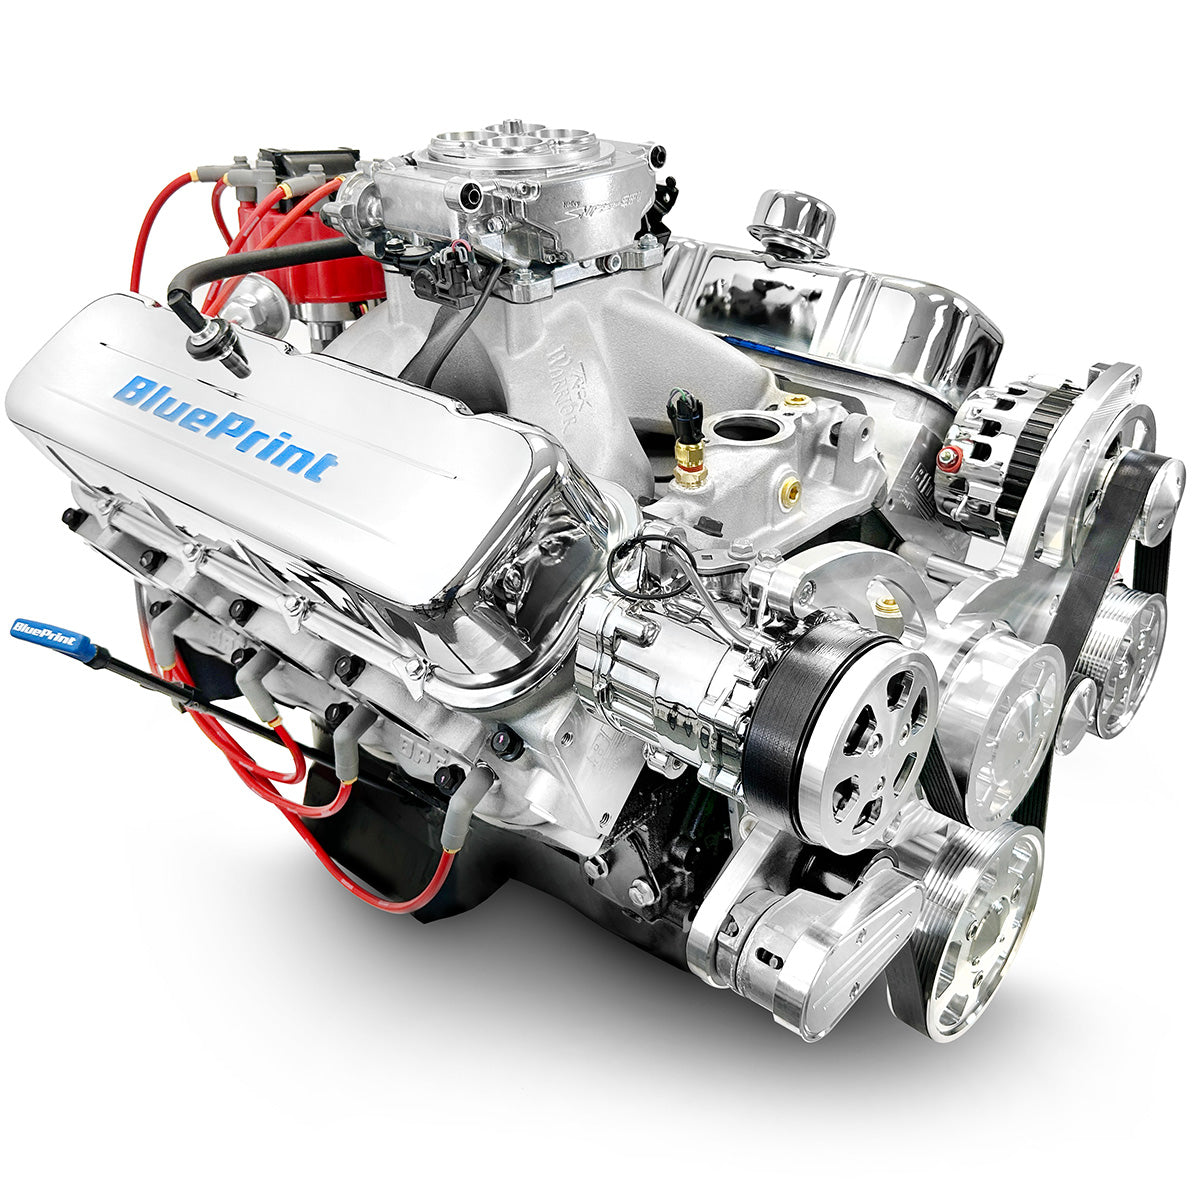 GM BB Compatible 454 c.i. Engine - 460 HP - Deluxe Dressed with 